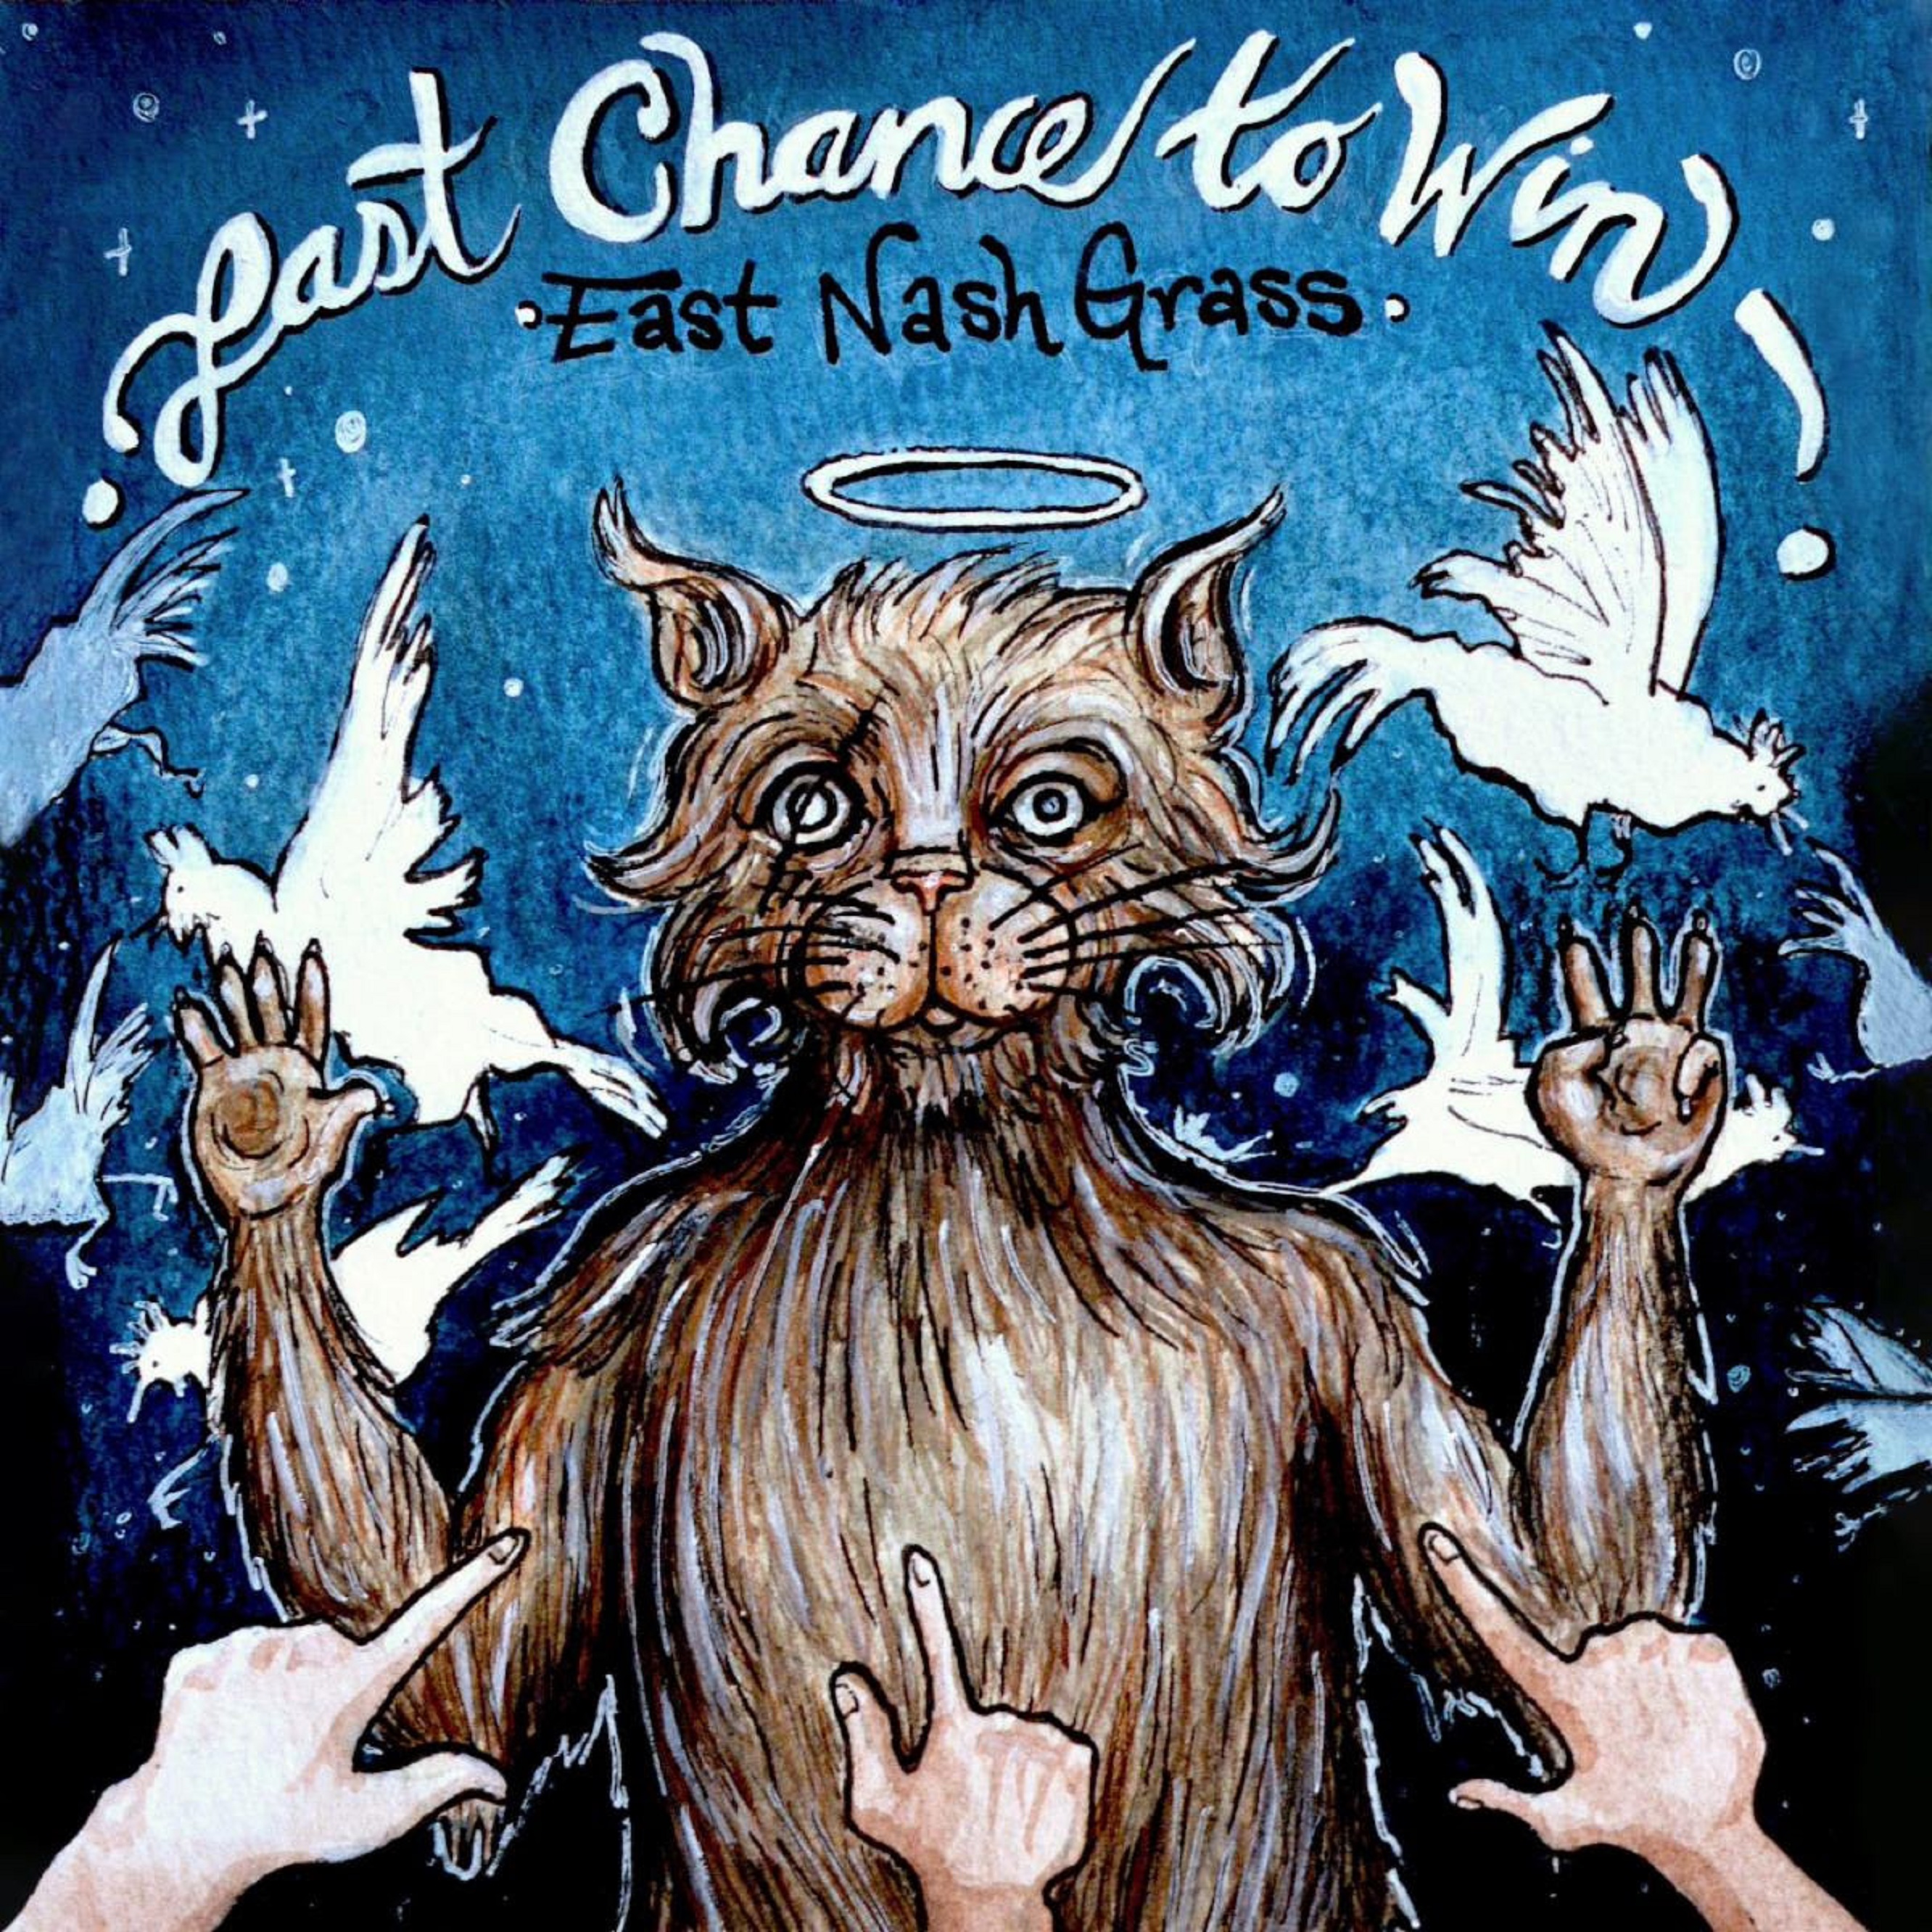 East Nash Grass Announces New Album "Last Chance To Win" – Out August 18th